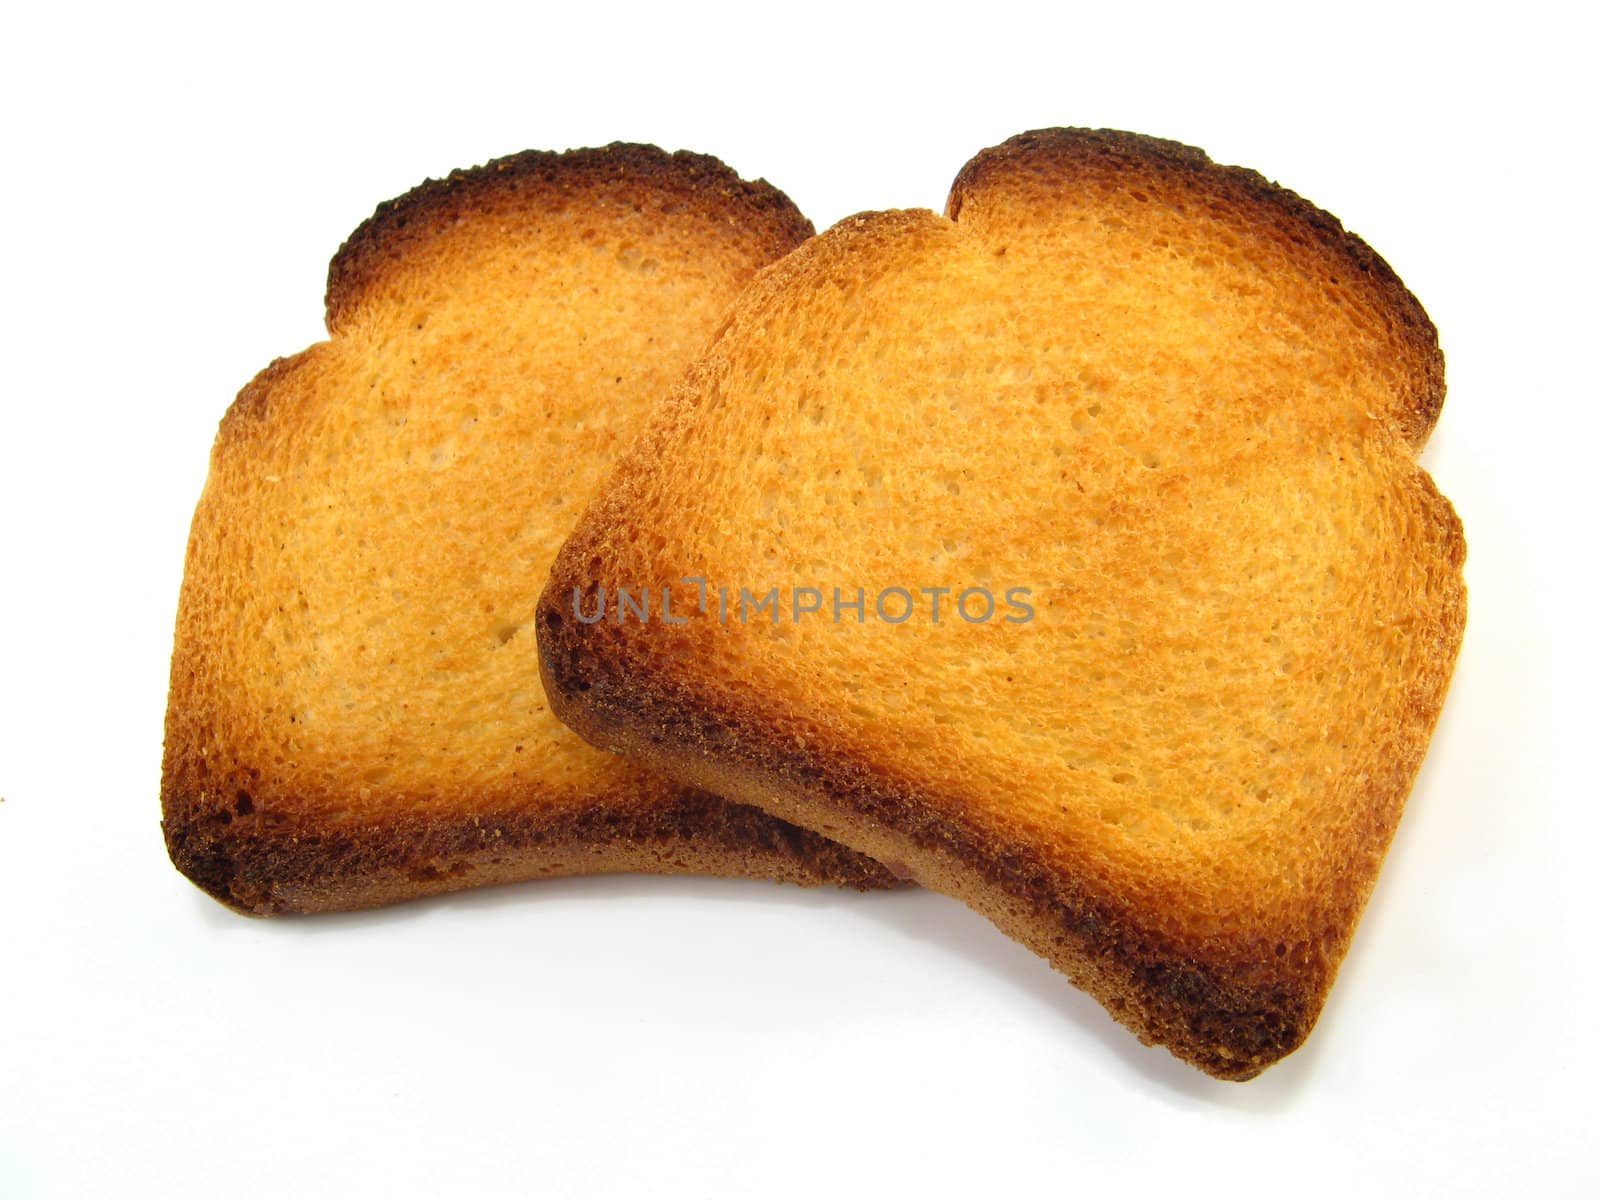 some slices of melba toast over a white background